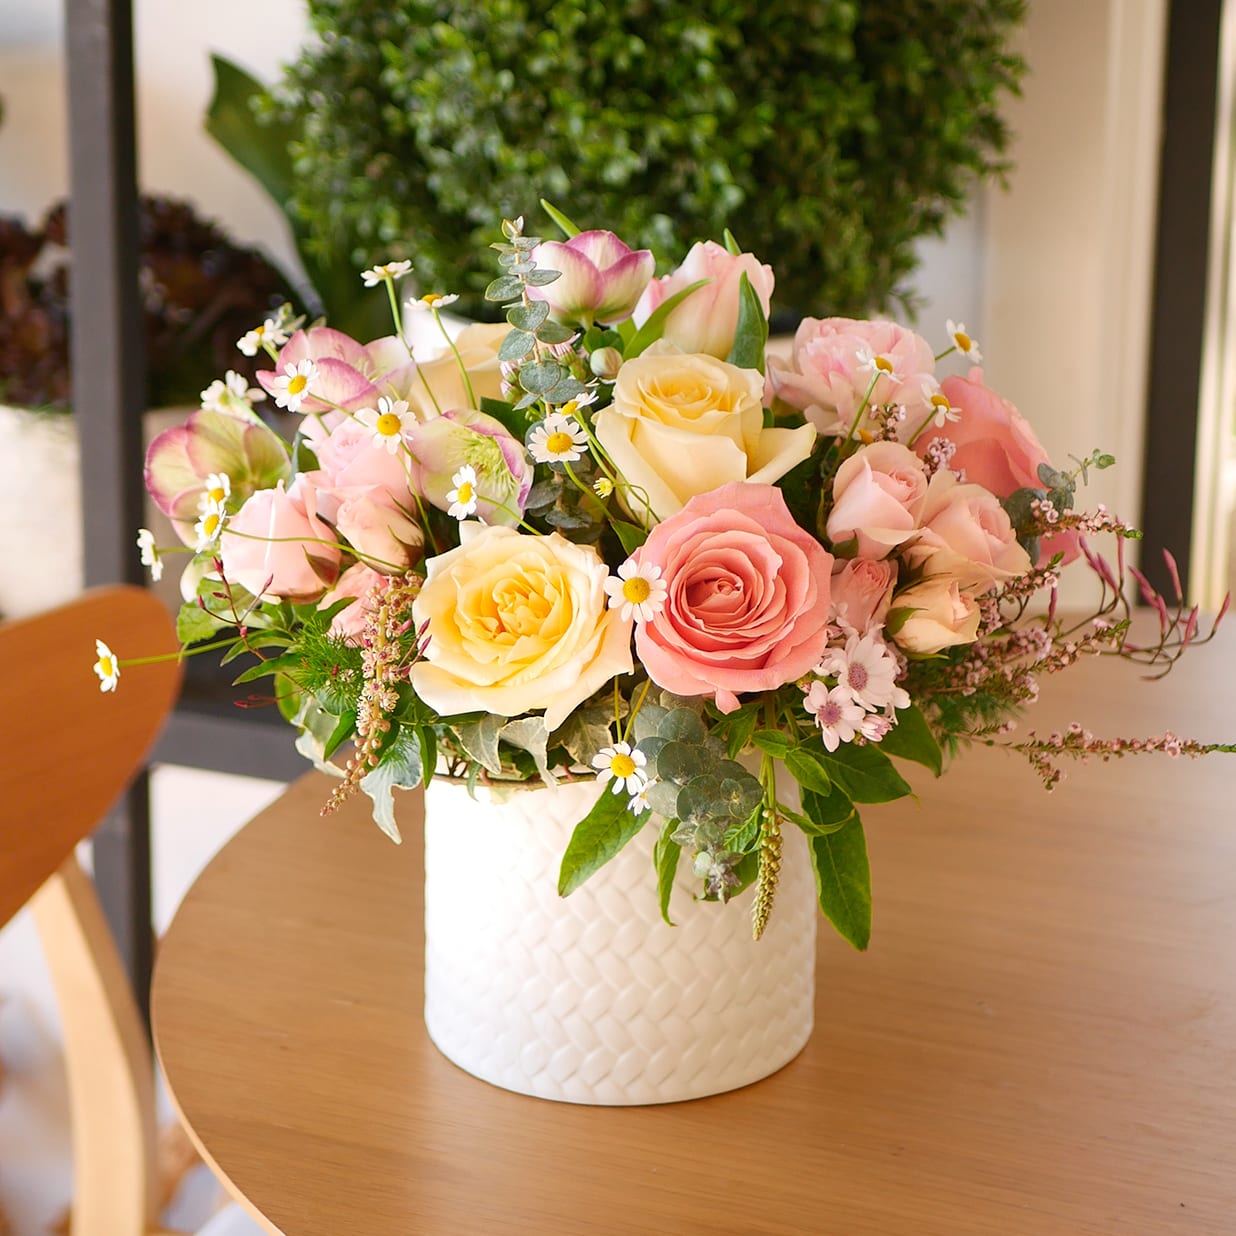 Spring Soirée - This Spring arrangement features a pastel palette of light pinks, whites, and yellows, nestled in a charming white ceramic vessel. Designed with roses, ranunculus, tulips, chamomile, hellebores, ivy and more.